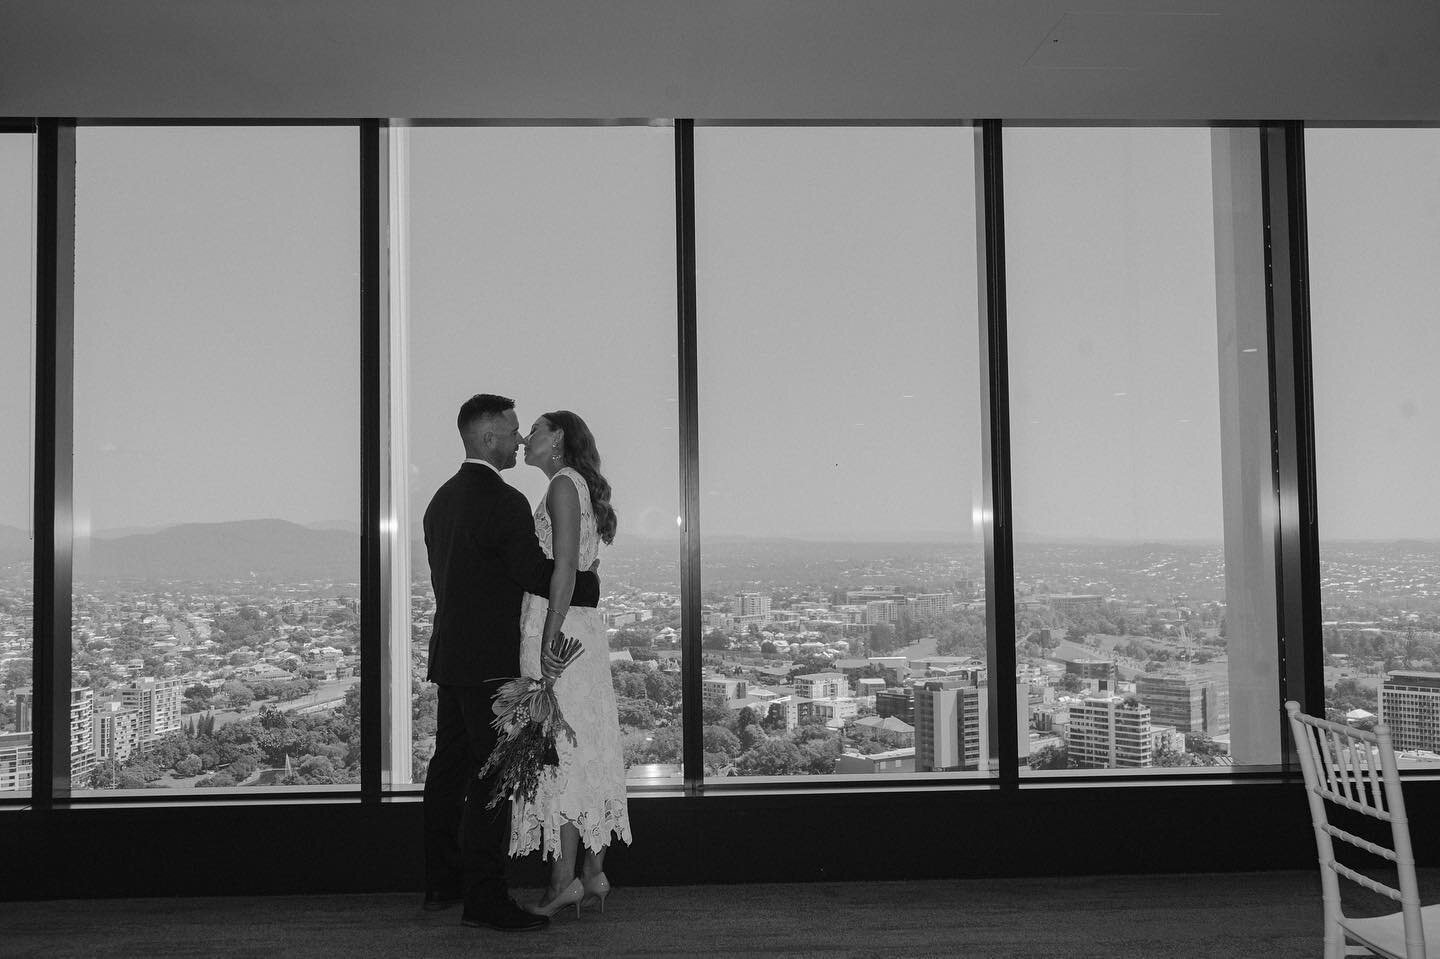 I always love a Brisbane Registry wedding. Amazing views and such a lovely space. Seems like we are becoming regulars at this rad space. @rbdm.qld  @cameracorp_aus @sonyalpha.anz #brisbane #brisbaneregistry #brisbaneelopement #brisbanecity #brisbanep